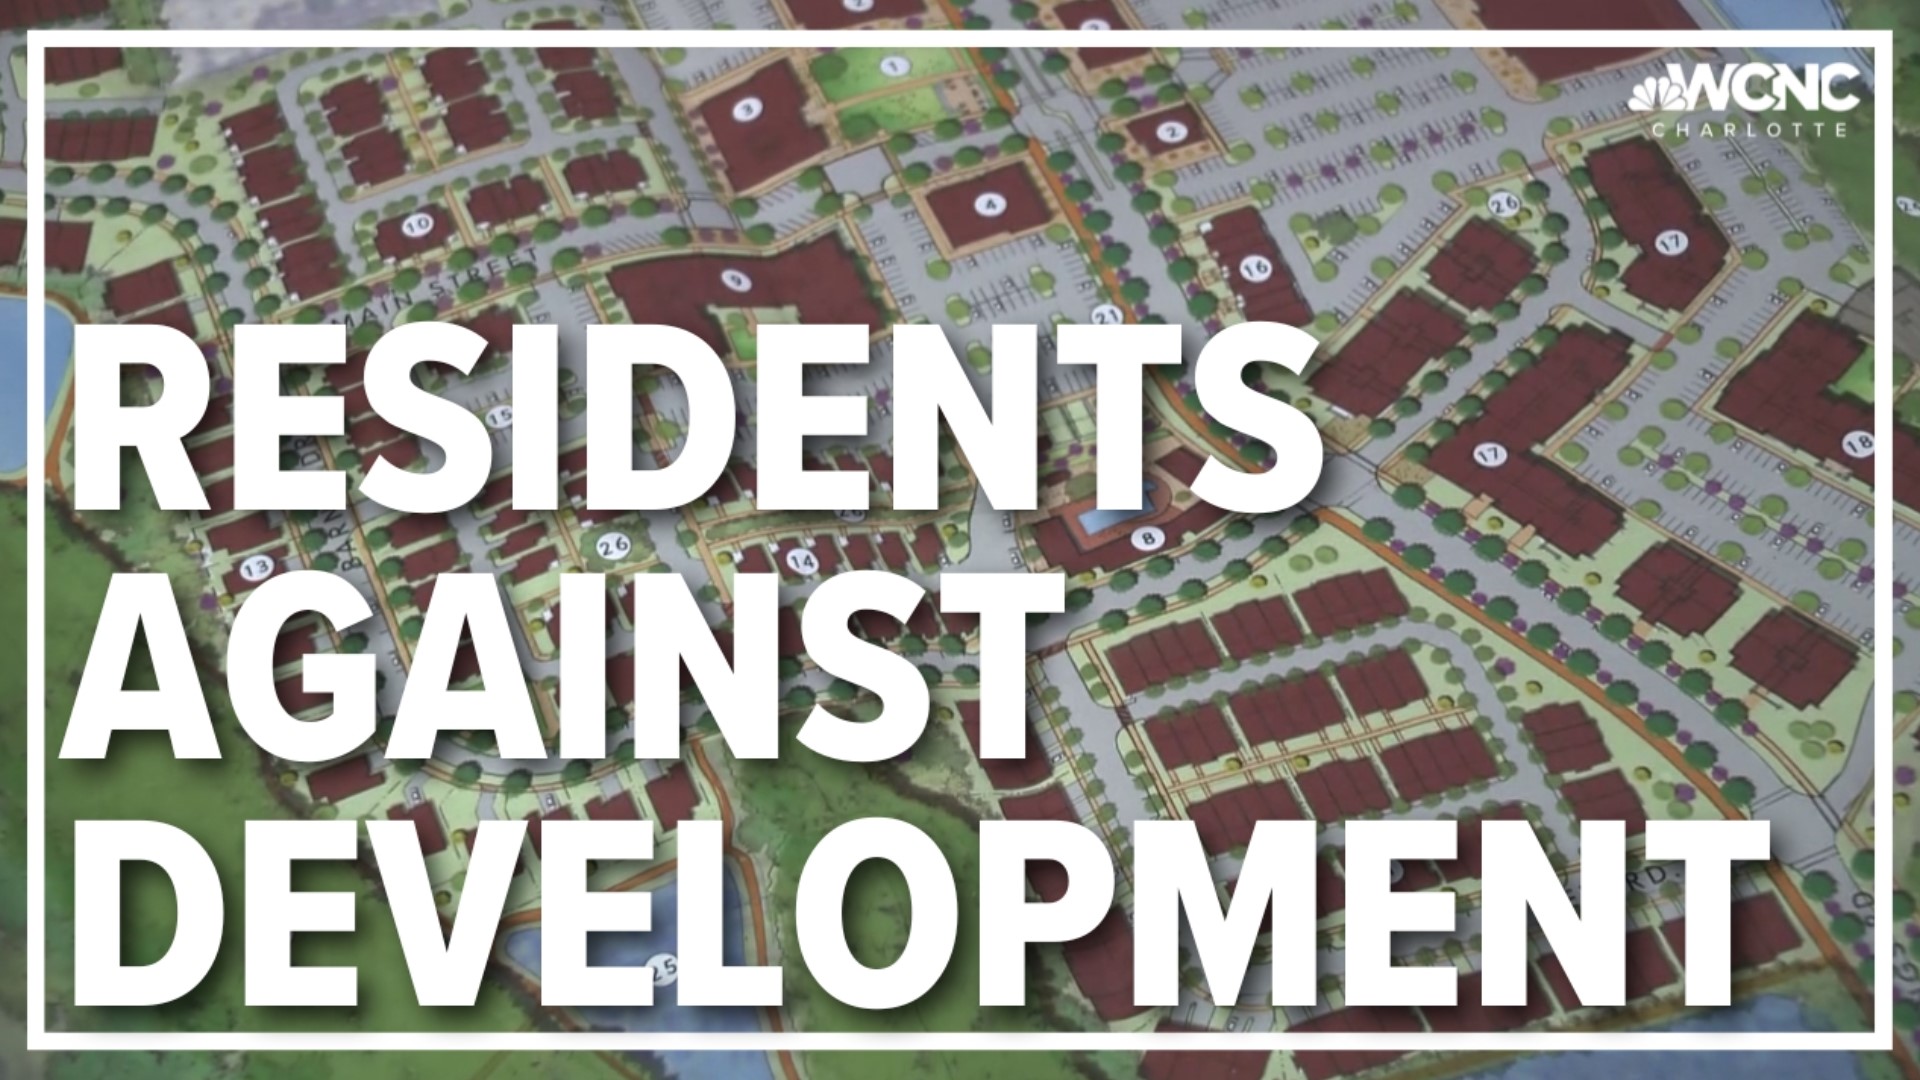 Matthews residents are hoping to stop a large town home and apartment community from being built on Idlewild Road.